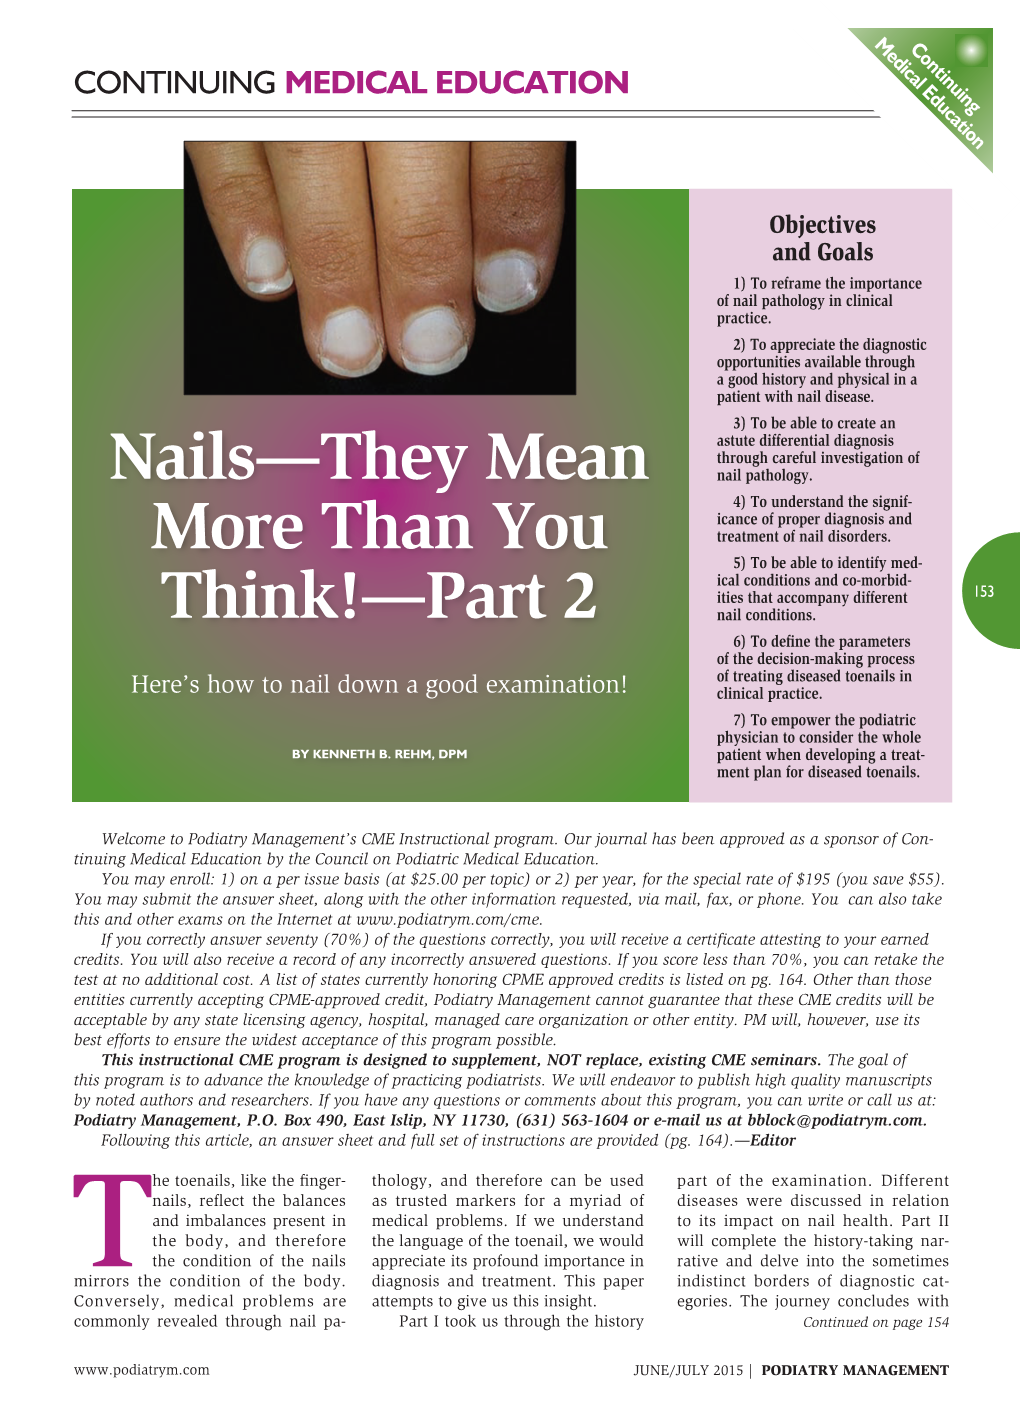 Nails—They Mean More Than You Think!—Part 2 (Rehm)